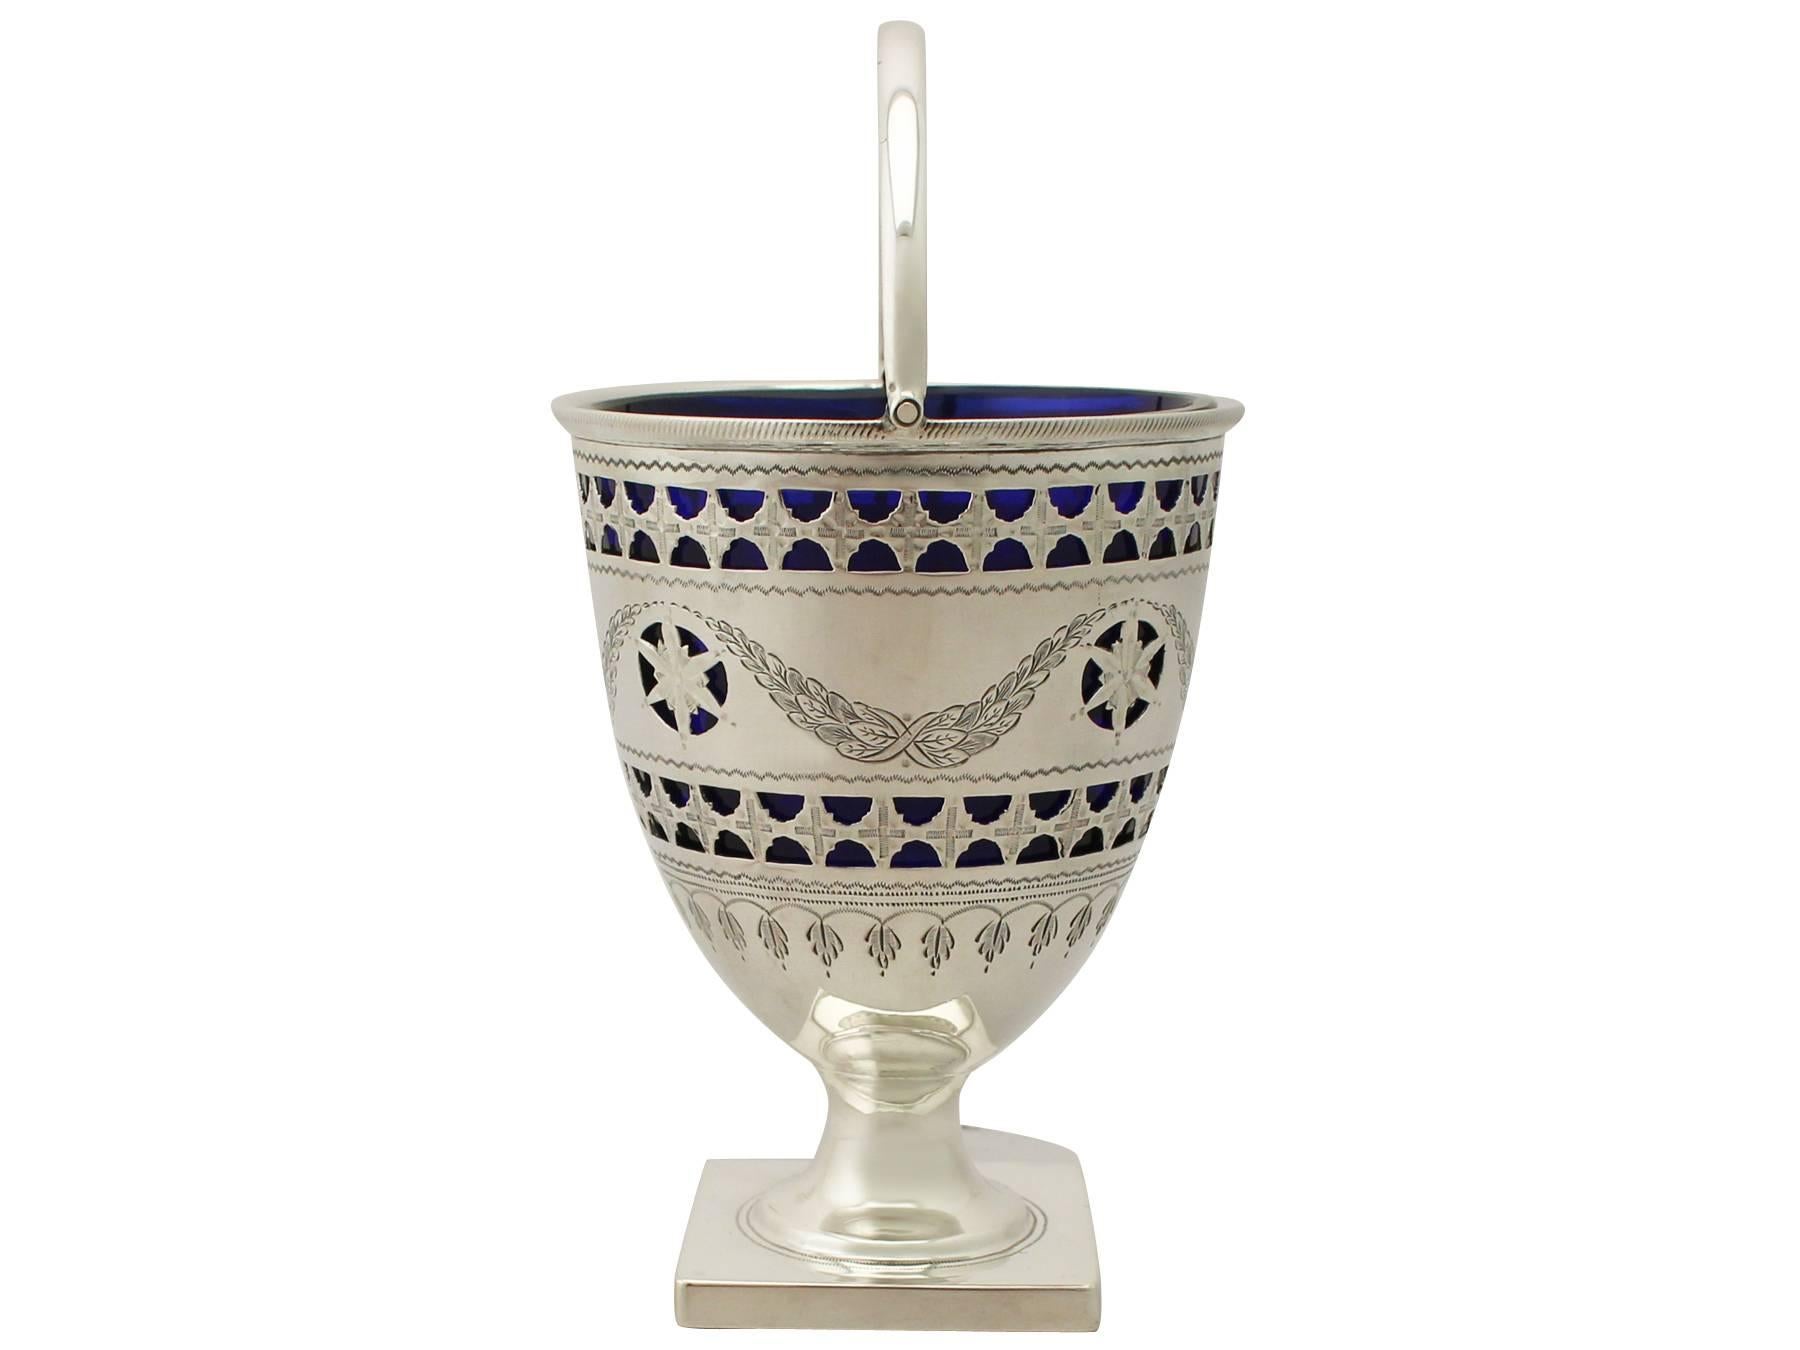 An exceptional, fine and impressive antique George V English sterling silver sugar basket in the George III style; an addition to our silver teaware collection.

This exceptional antique George V sterling silver sugar basket has a plain bell